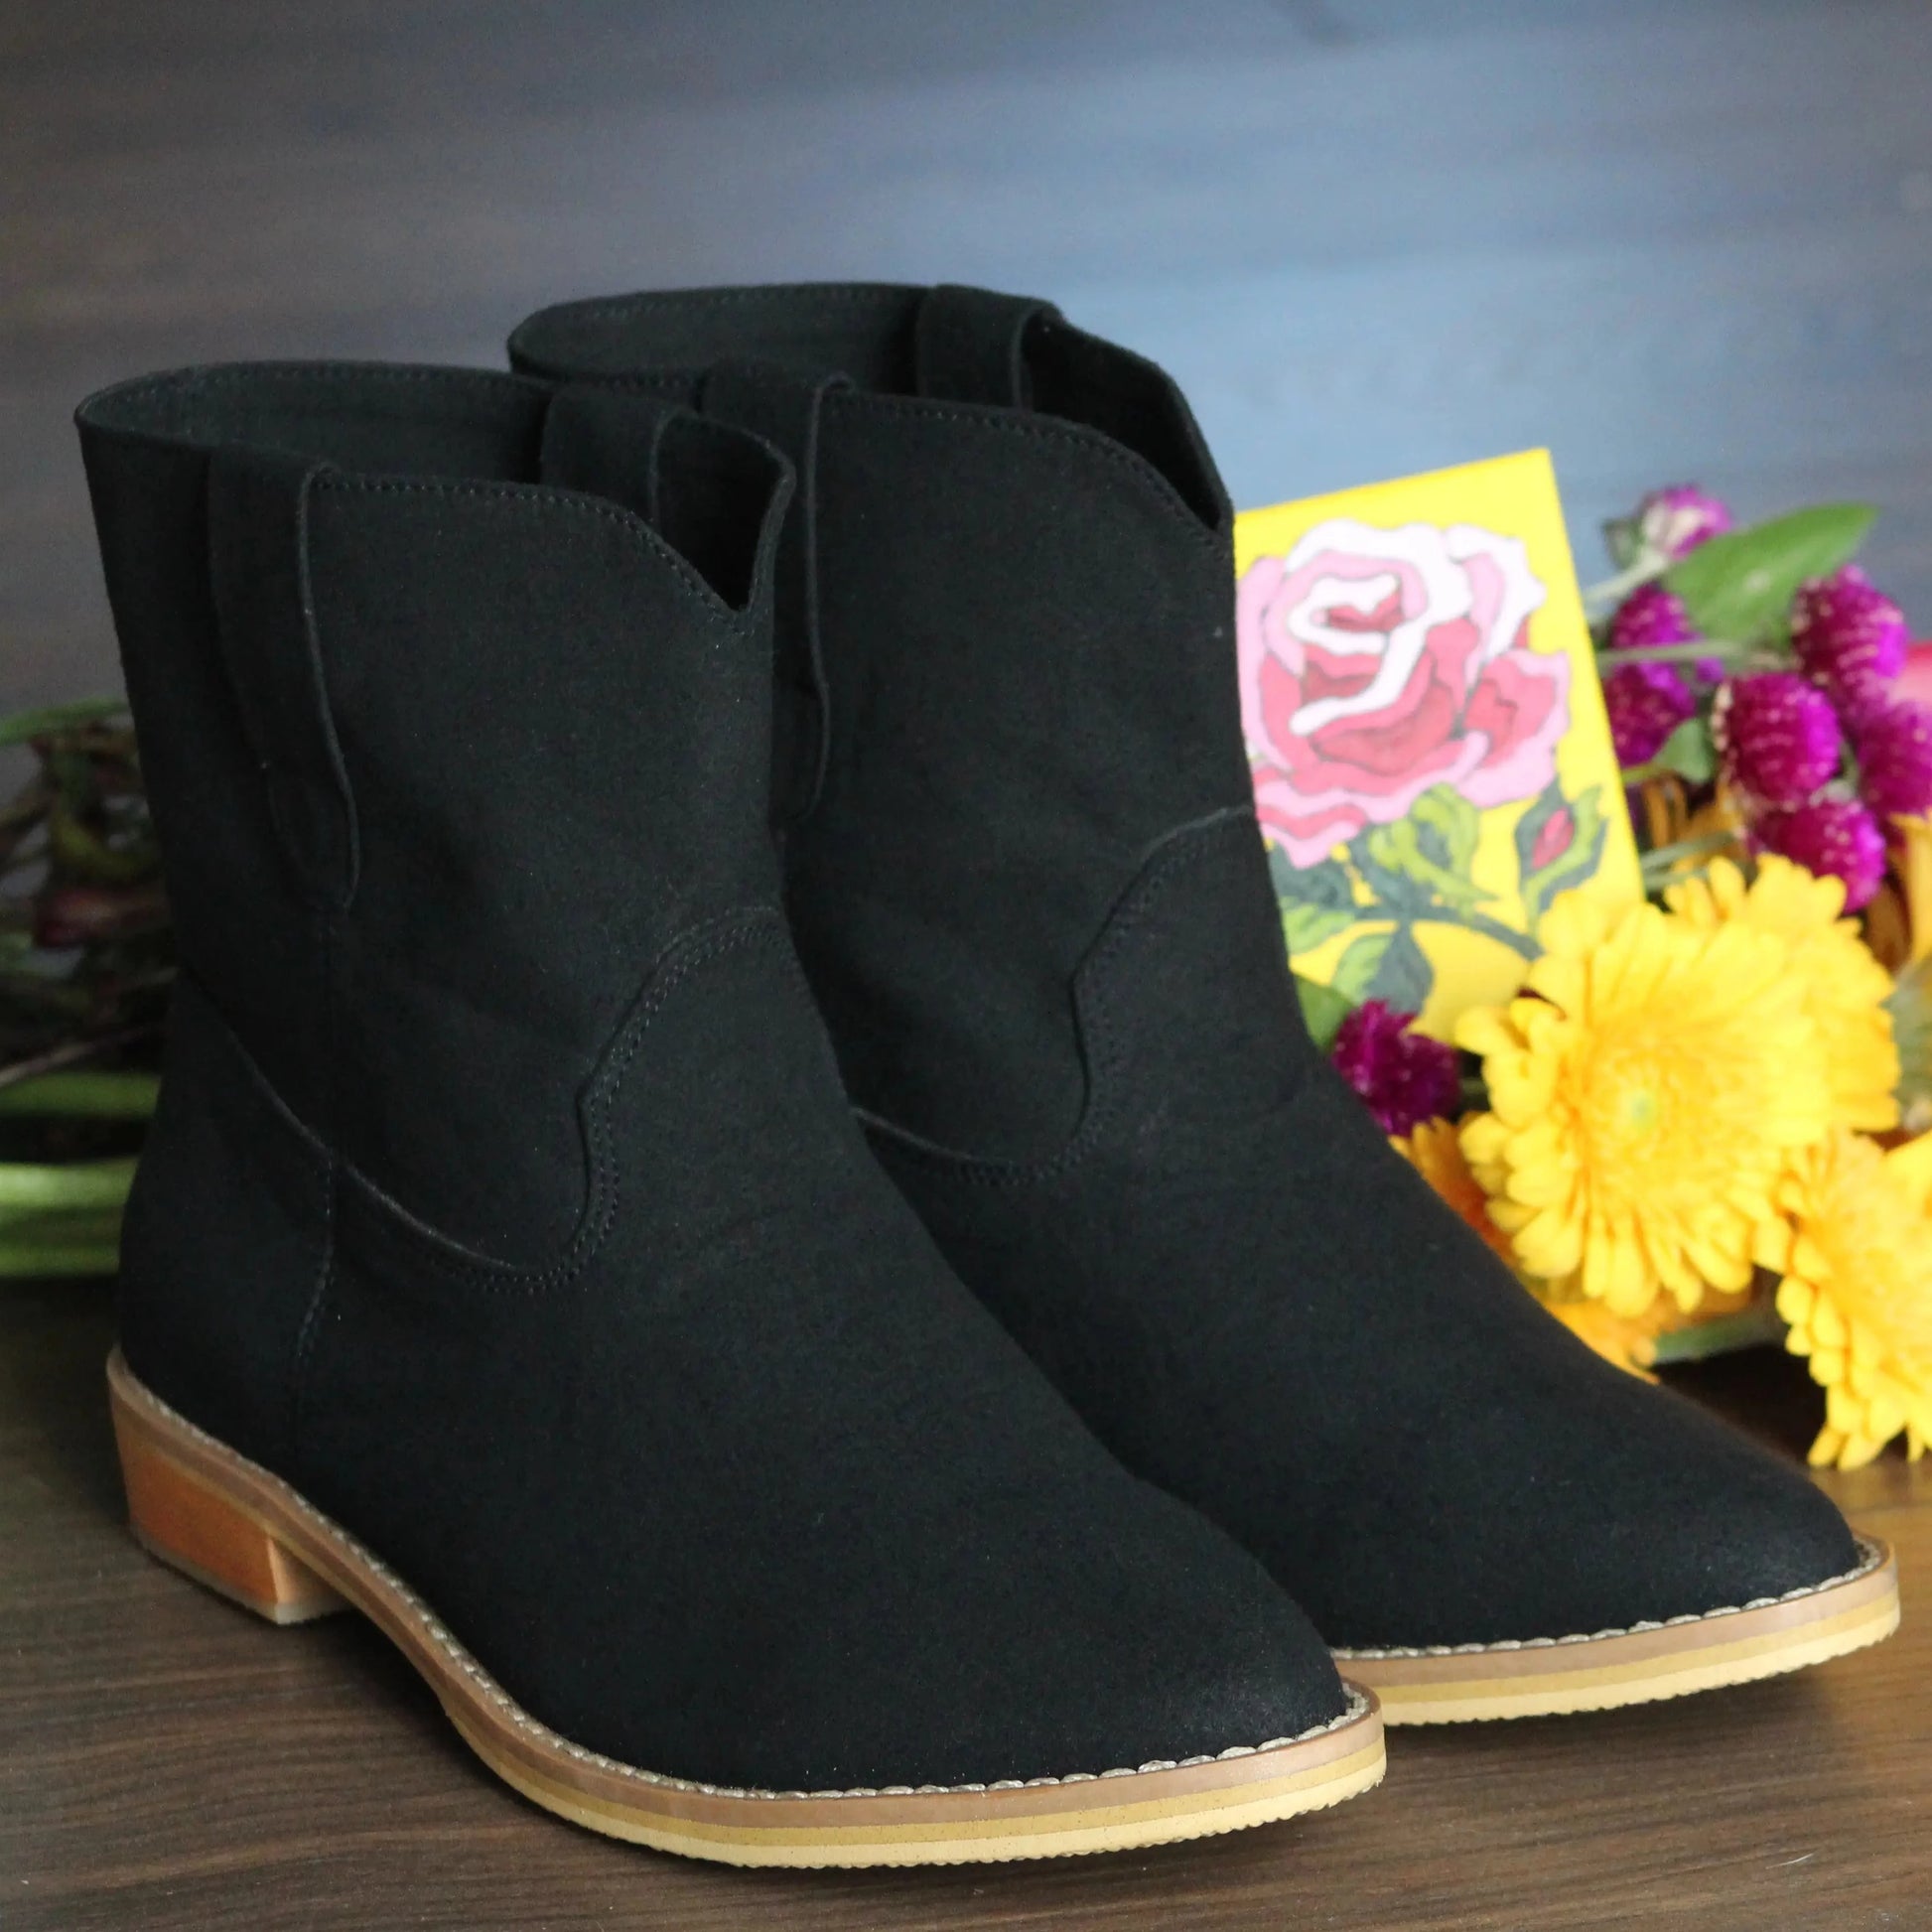 Vegan boots for women Australia. Flat boots beige, light coloured. pointy simple style women's boots. Vegan faux-suede Summer Spring Autumn Winter boots Australia. Handmade in Bali, ethical fashion, female-run business, cruelty-free footwear. Tasmania vegan shoes for women